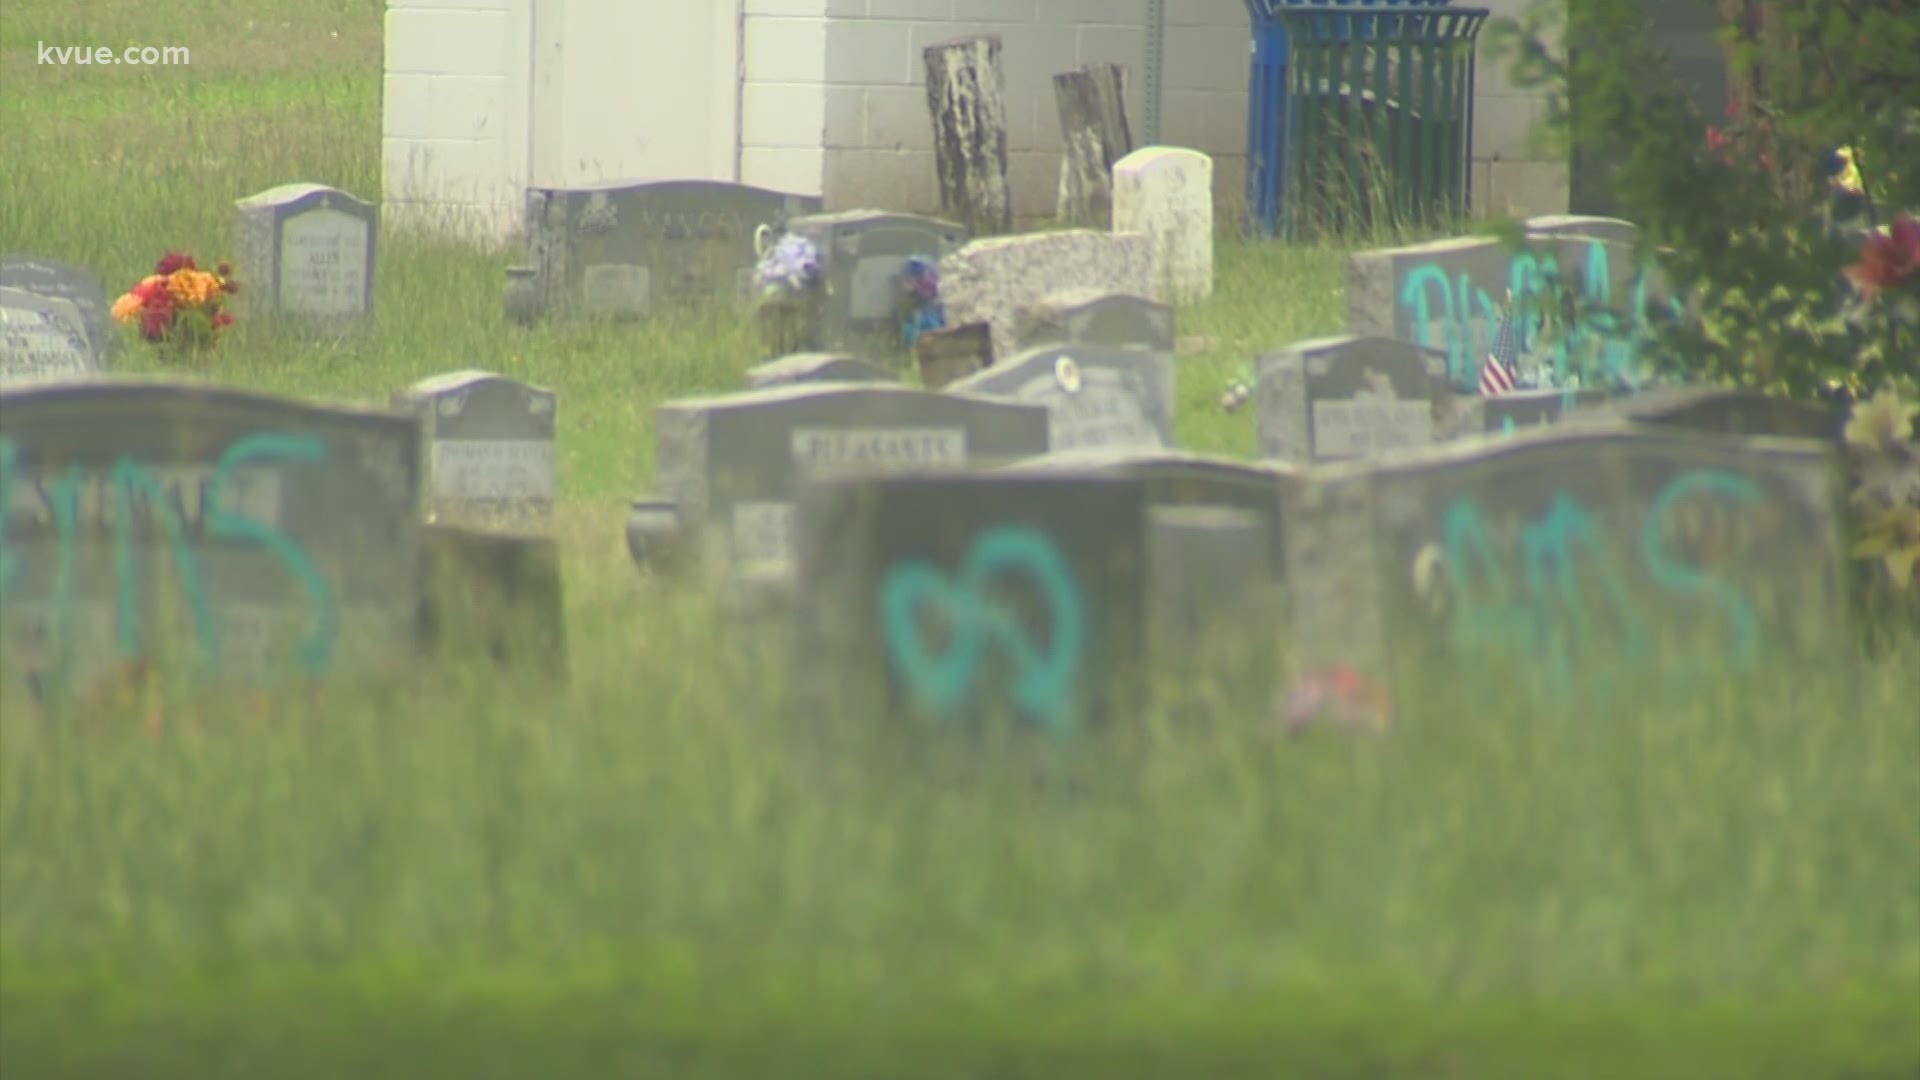 More than a dozen headstones at Evergreen Cemetery were tagged with graffiti. Now the City is trying to figure out who's responsible.